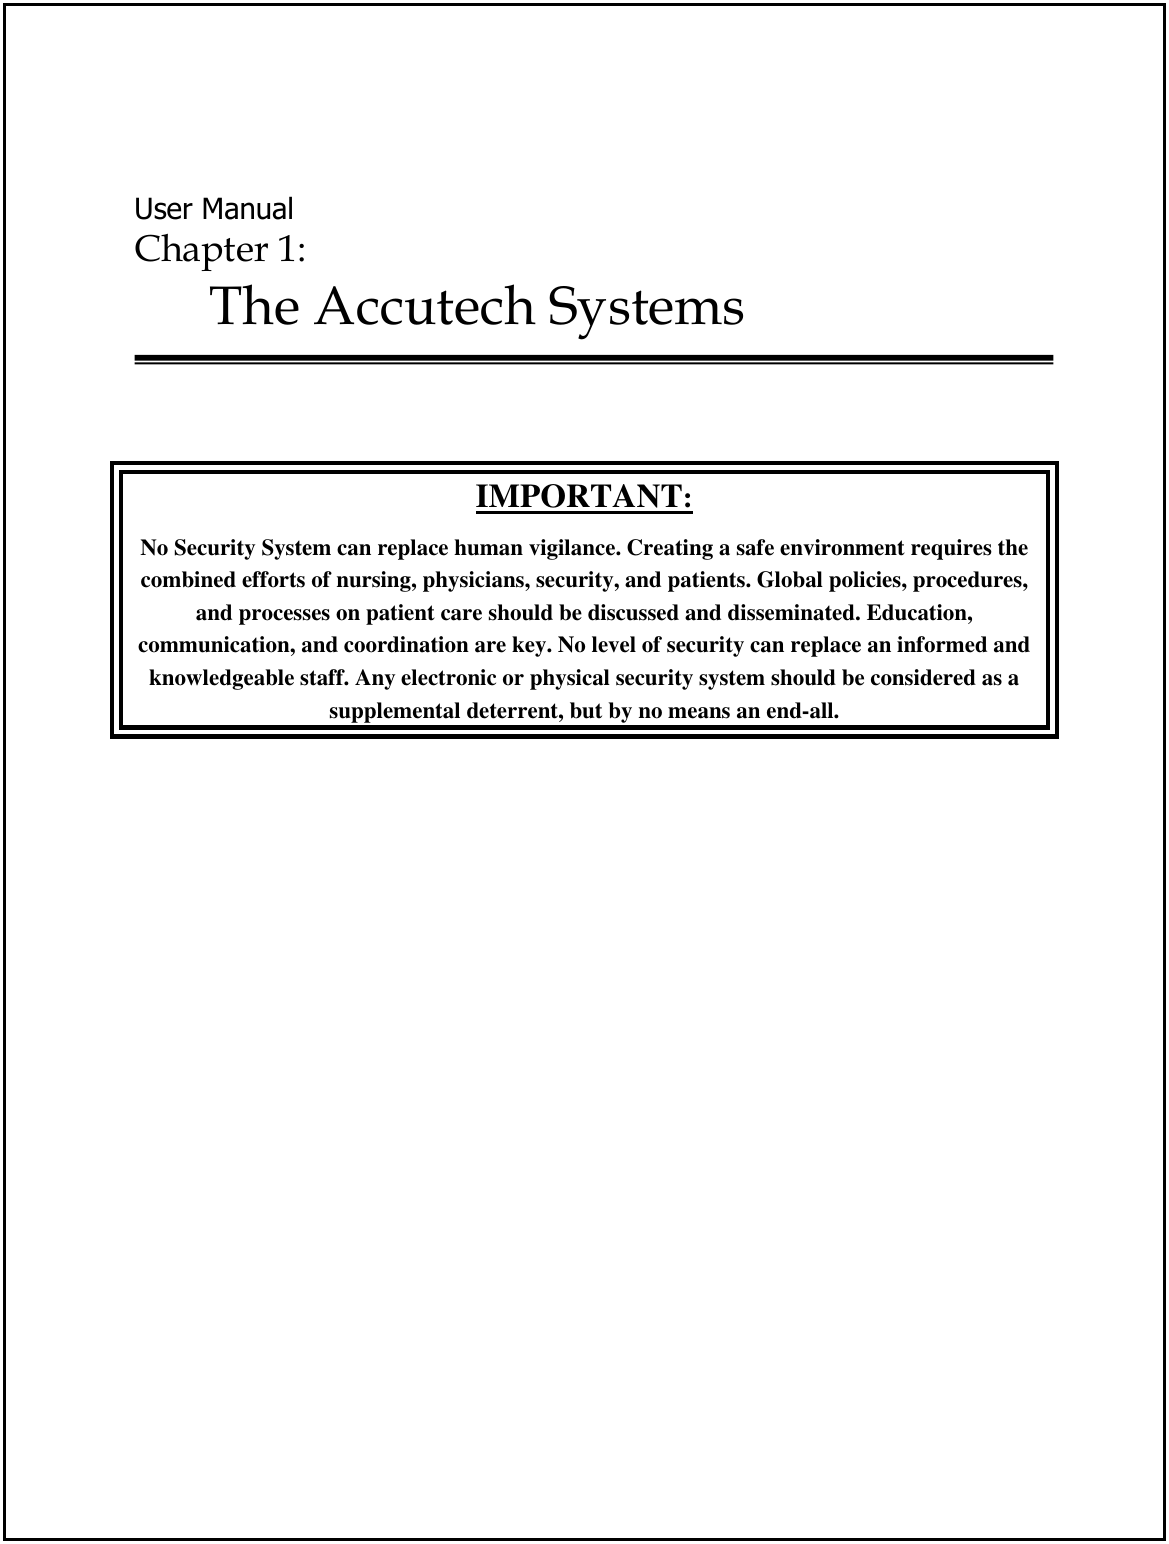  User Manual Chapter 1:  The Accutech Systems    IMPORTANT: No Security System can replace human vigilance. Creating a safe environment requires the combined efforts of nursing, physicians, security, and patients. Global policies, procedures, and processes on patient care should be discussed and disseminated. Education, communication, and coordination are key. No level of security can replace an informed and knowledgeable staff. Any electronic or physical security system should be considered as a  supplemental deterrent, but by no means an end-all. 